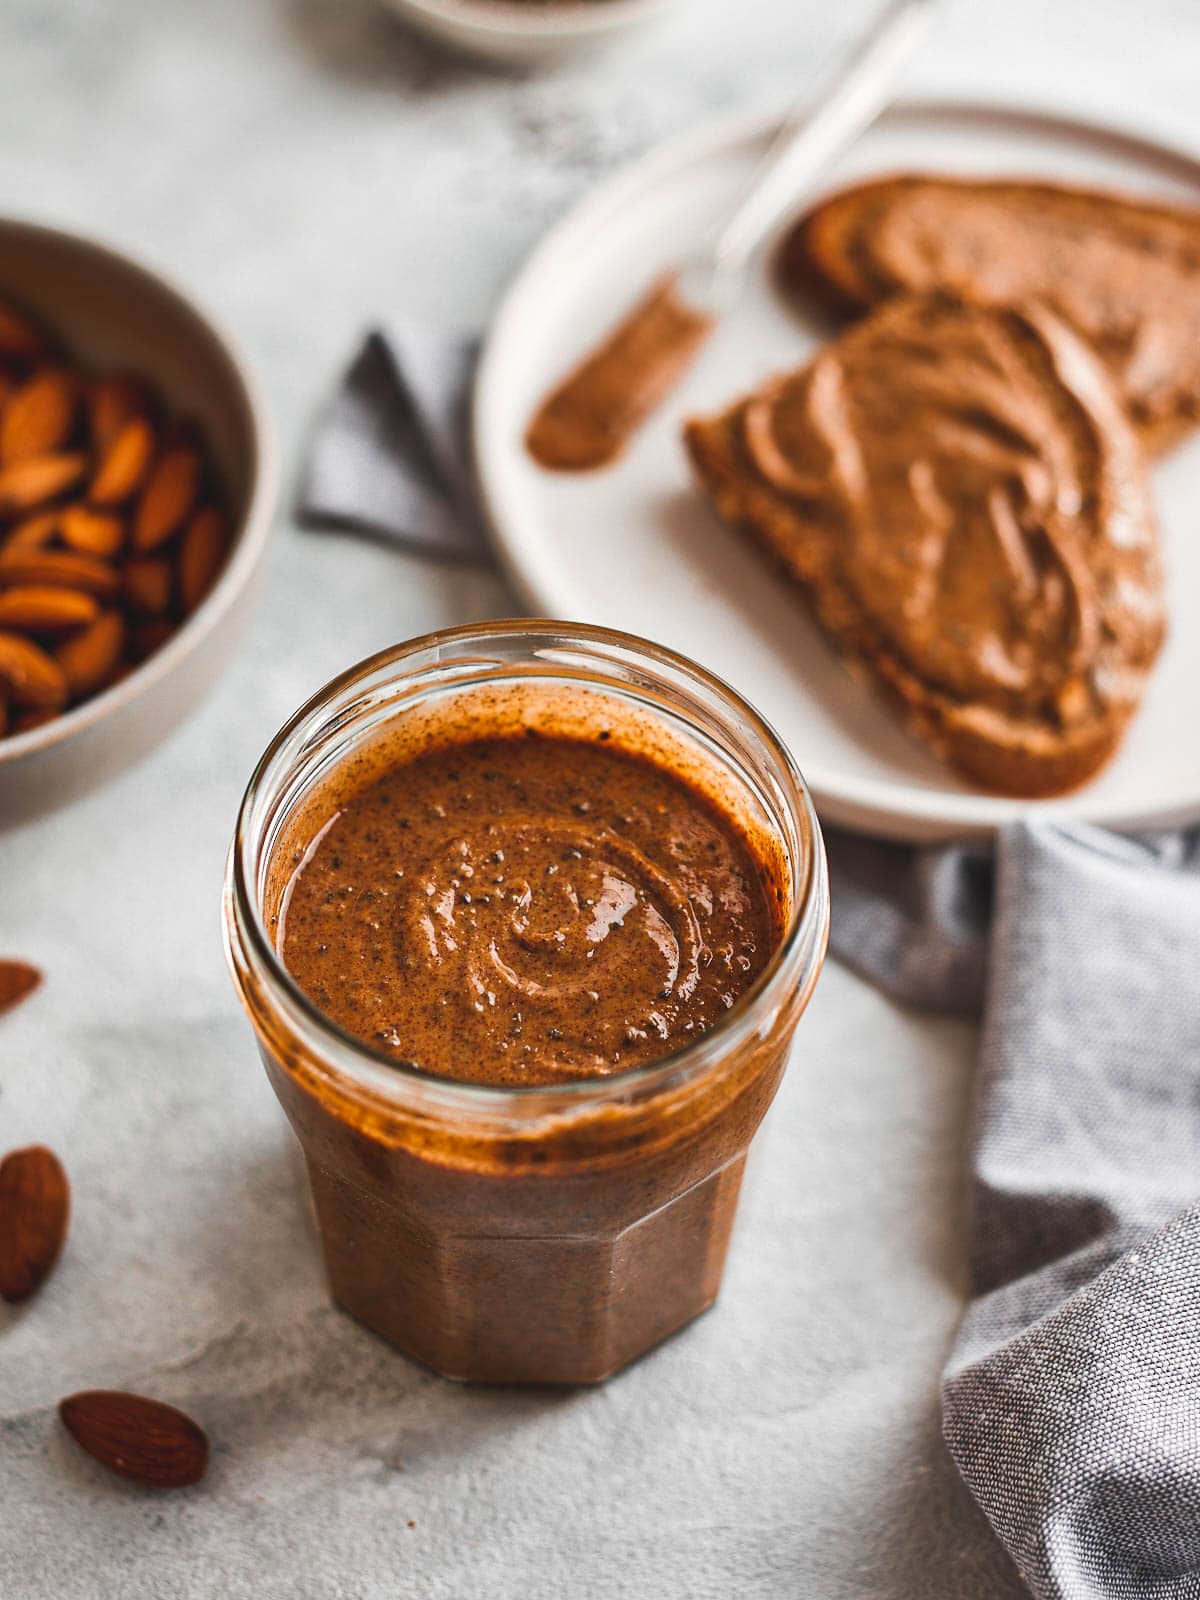 Almond chia seed butter in a jar with toast and a bowl of almonds behind it